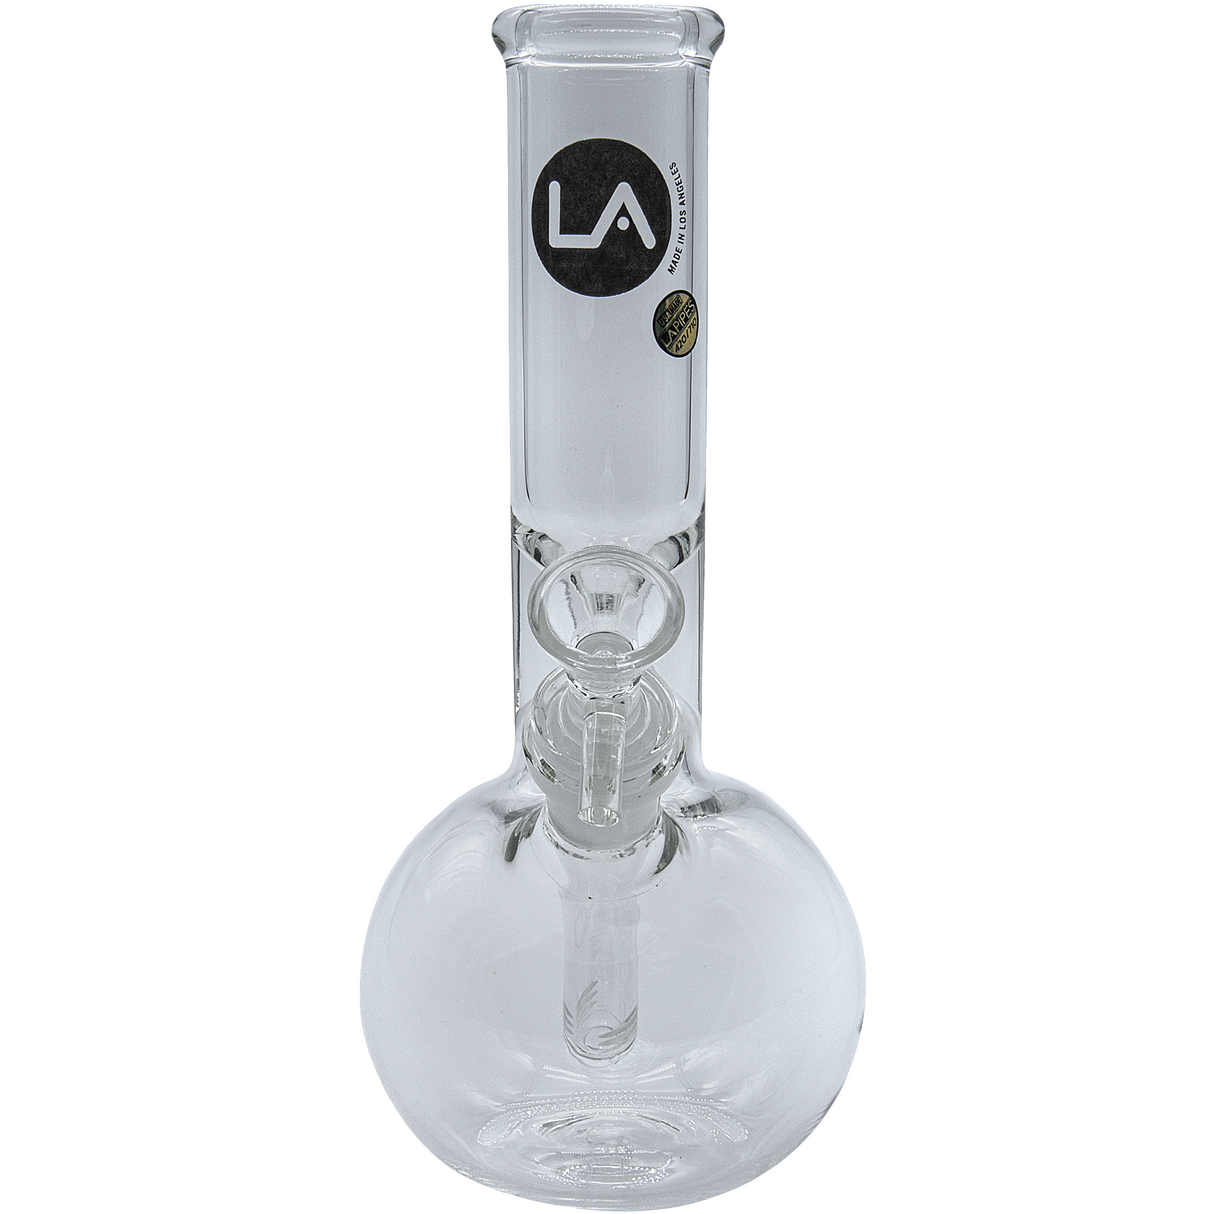 LA Pipes "Baller" Bubble Base Bong with clear borosilicate glass, front view on white background